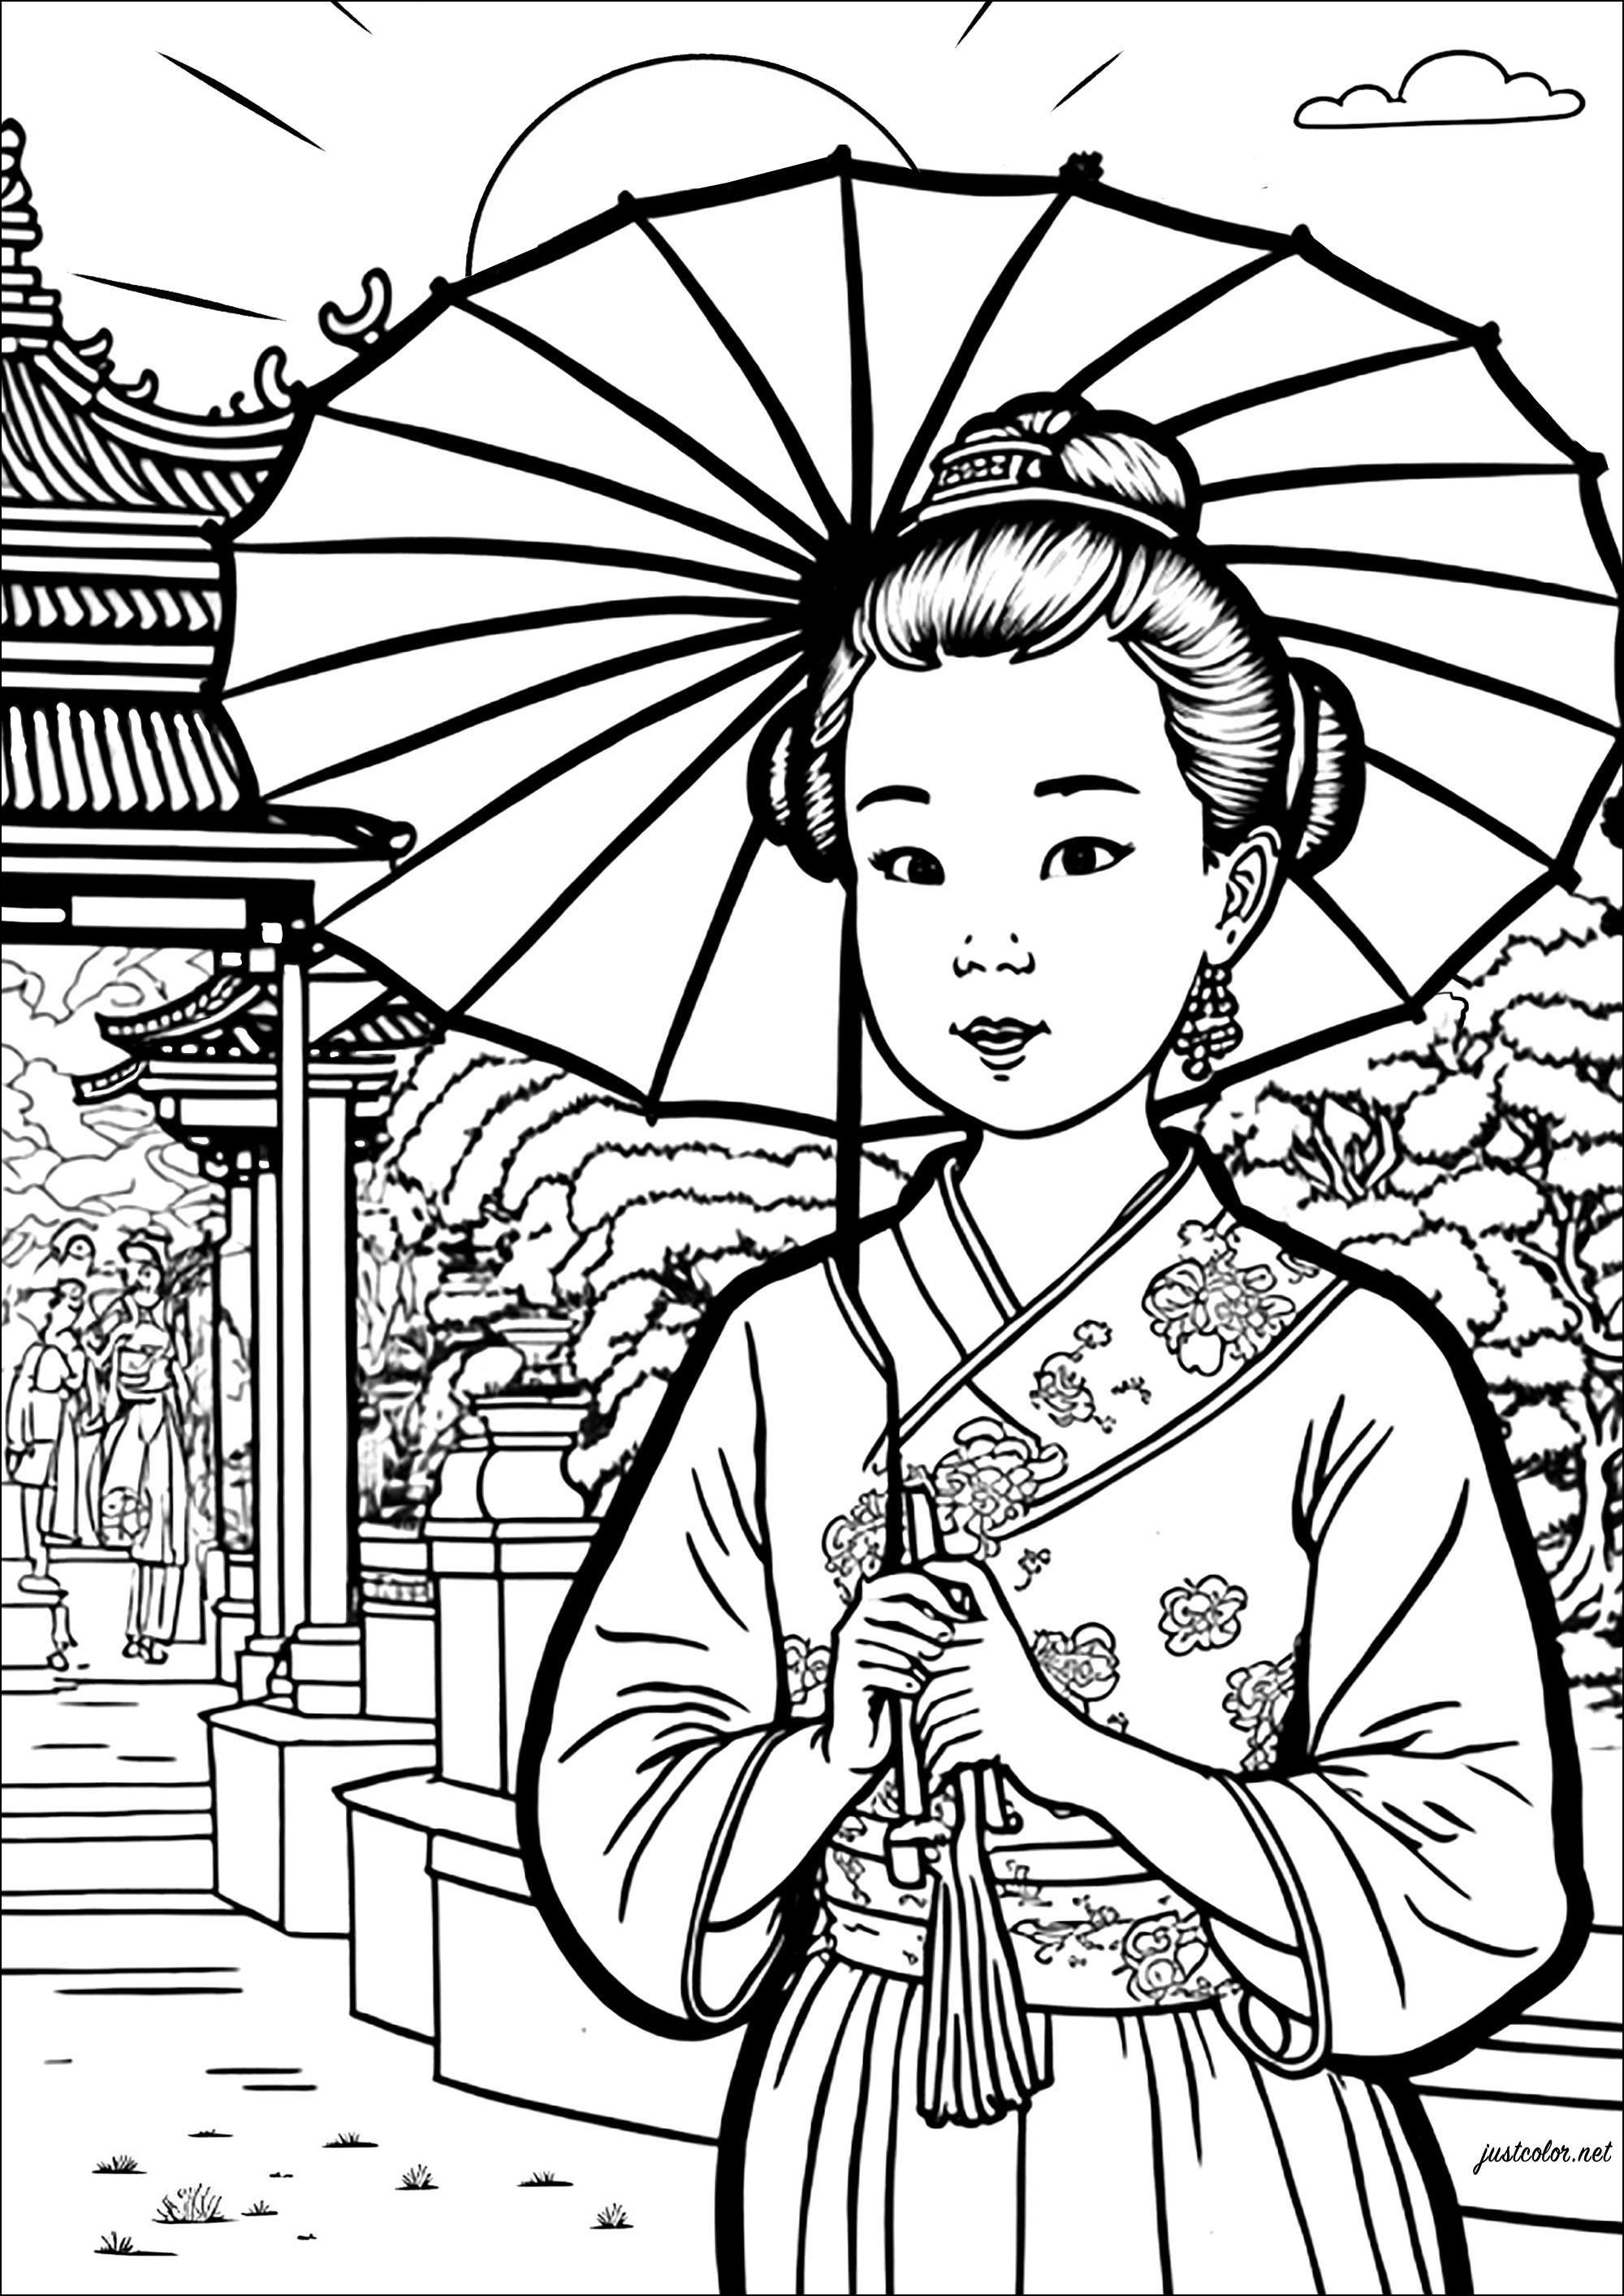 Coloring a young Chinese woman with an umbrella. Color the pretty temple and garden in the background of this beautiful drawing.